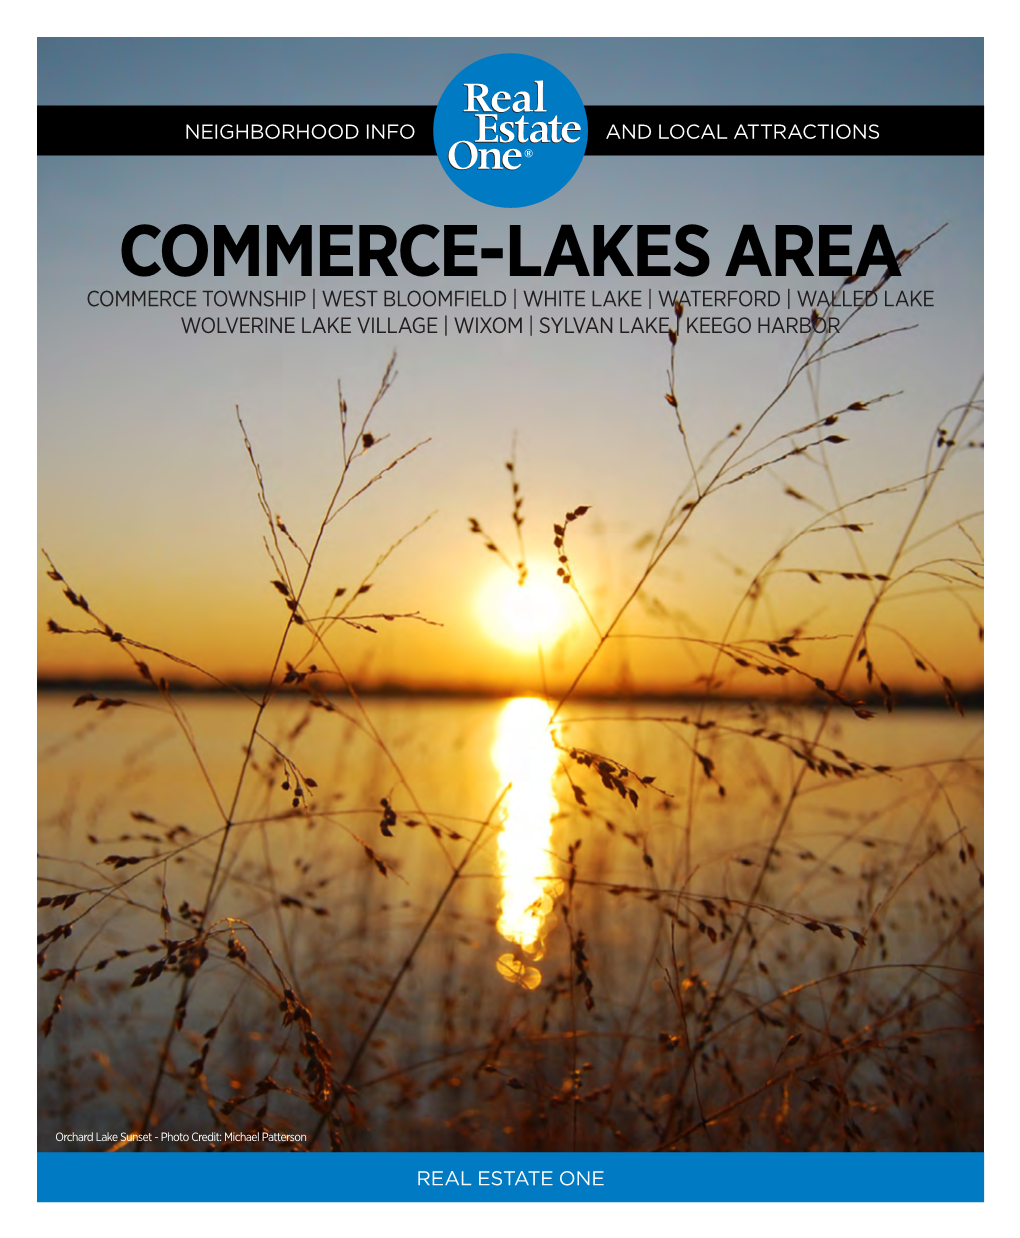 Commerce-Lakes Area Commerce Township | West Bloomfield | White Lake | Waterford | Walled Lake Wolverine Lake Village | Wixom | Sylvan Lake | Keego Harbor